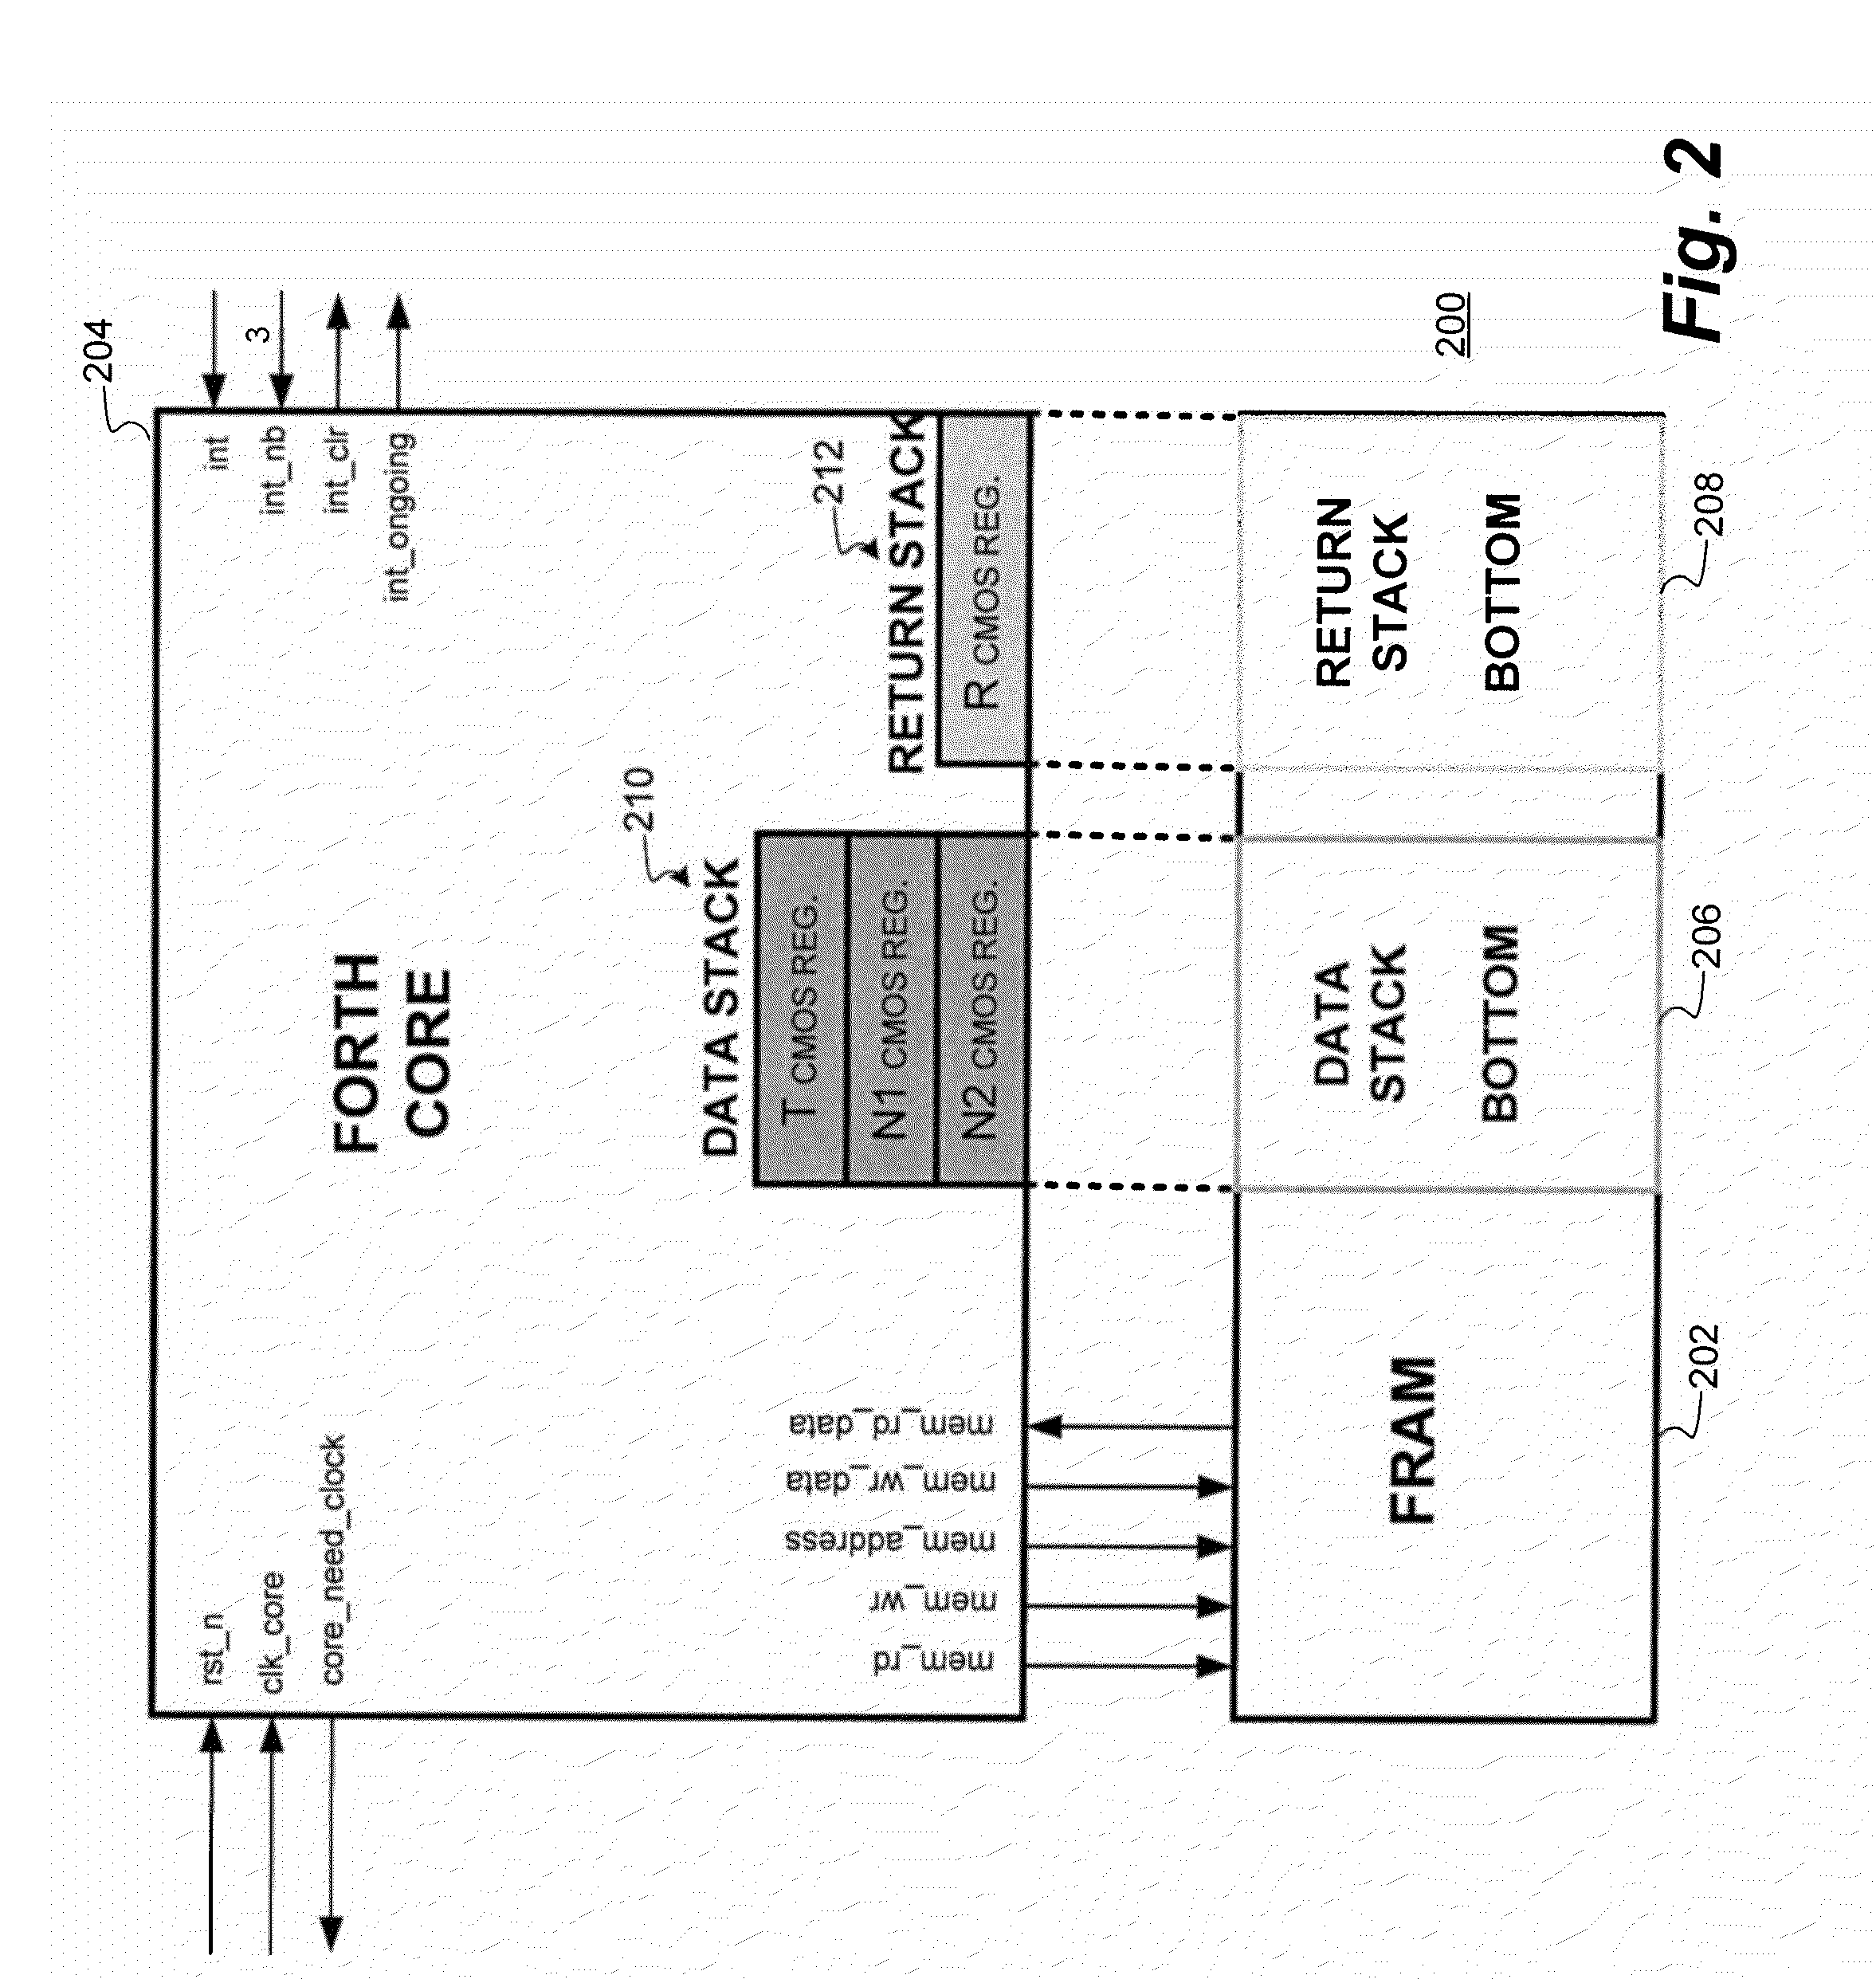 Stack processor using a ferroelectric random access memory (F-RAM) for both code and data space